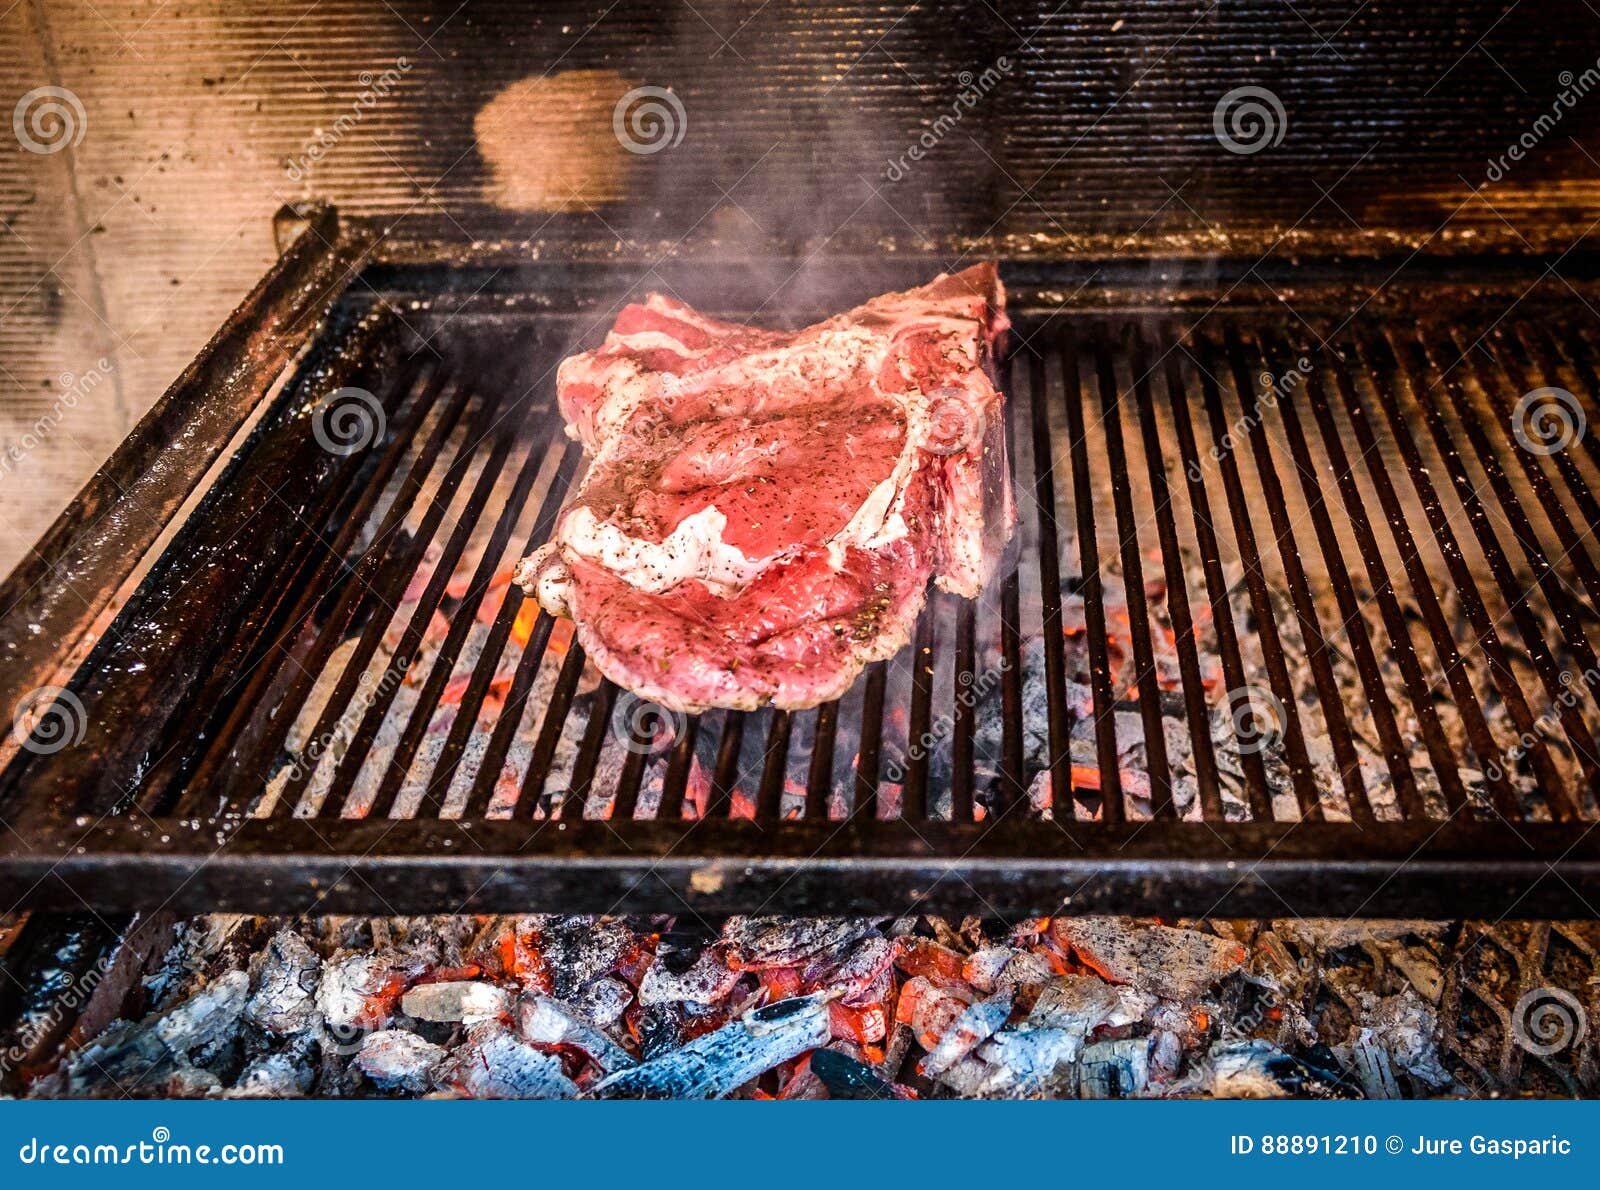 Grilling Big T Bone Steak On Natural Charcoal Barbecue Grill Stock Photo Image Of Food Pork 88891210